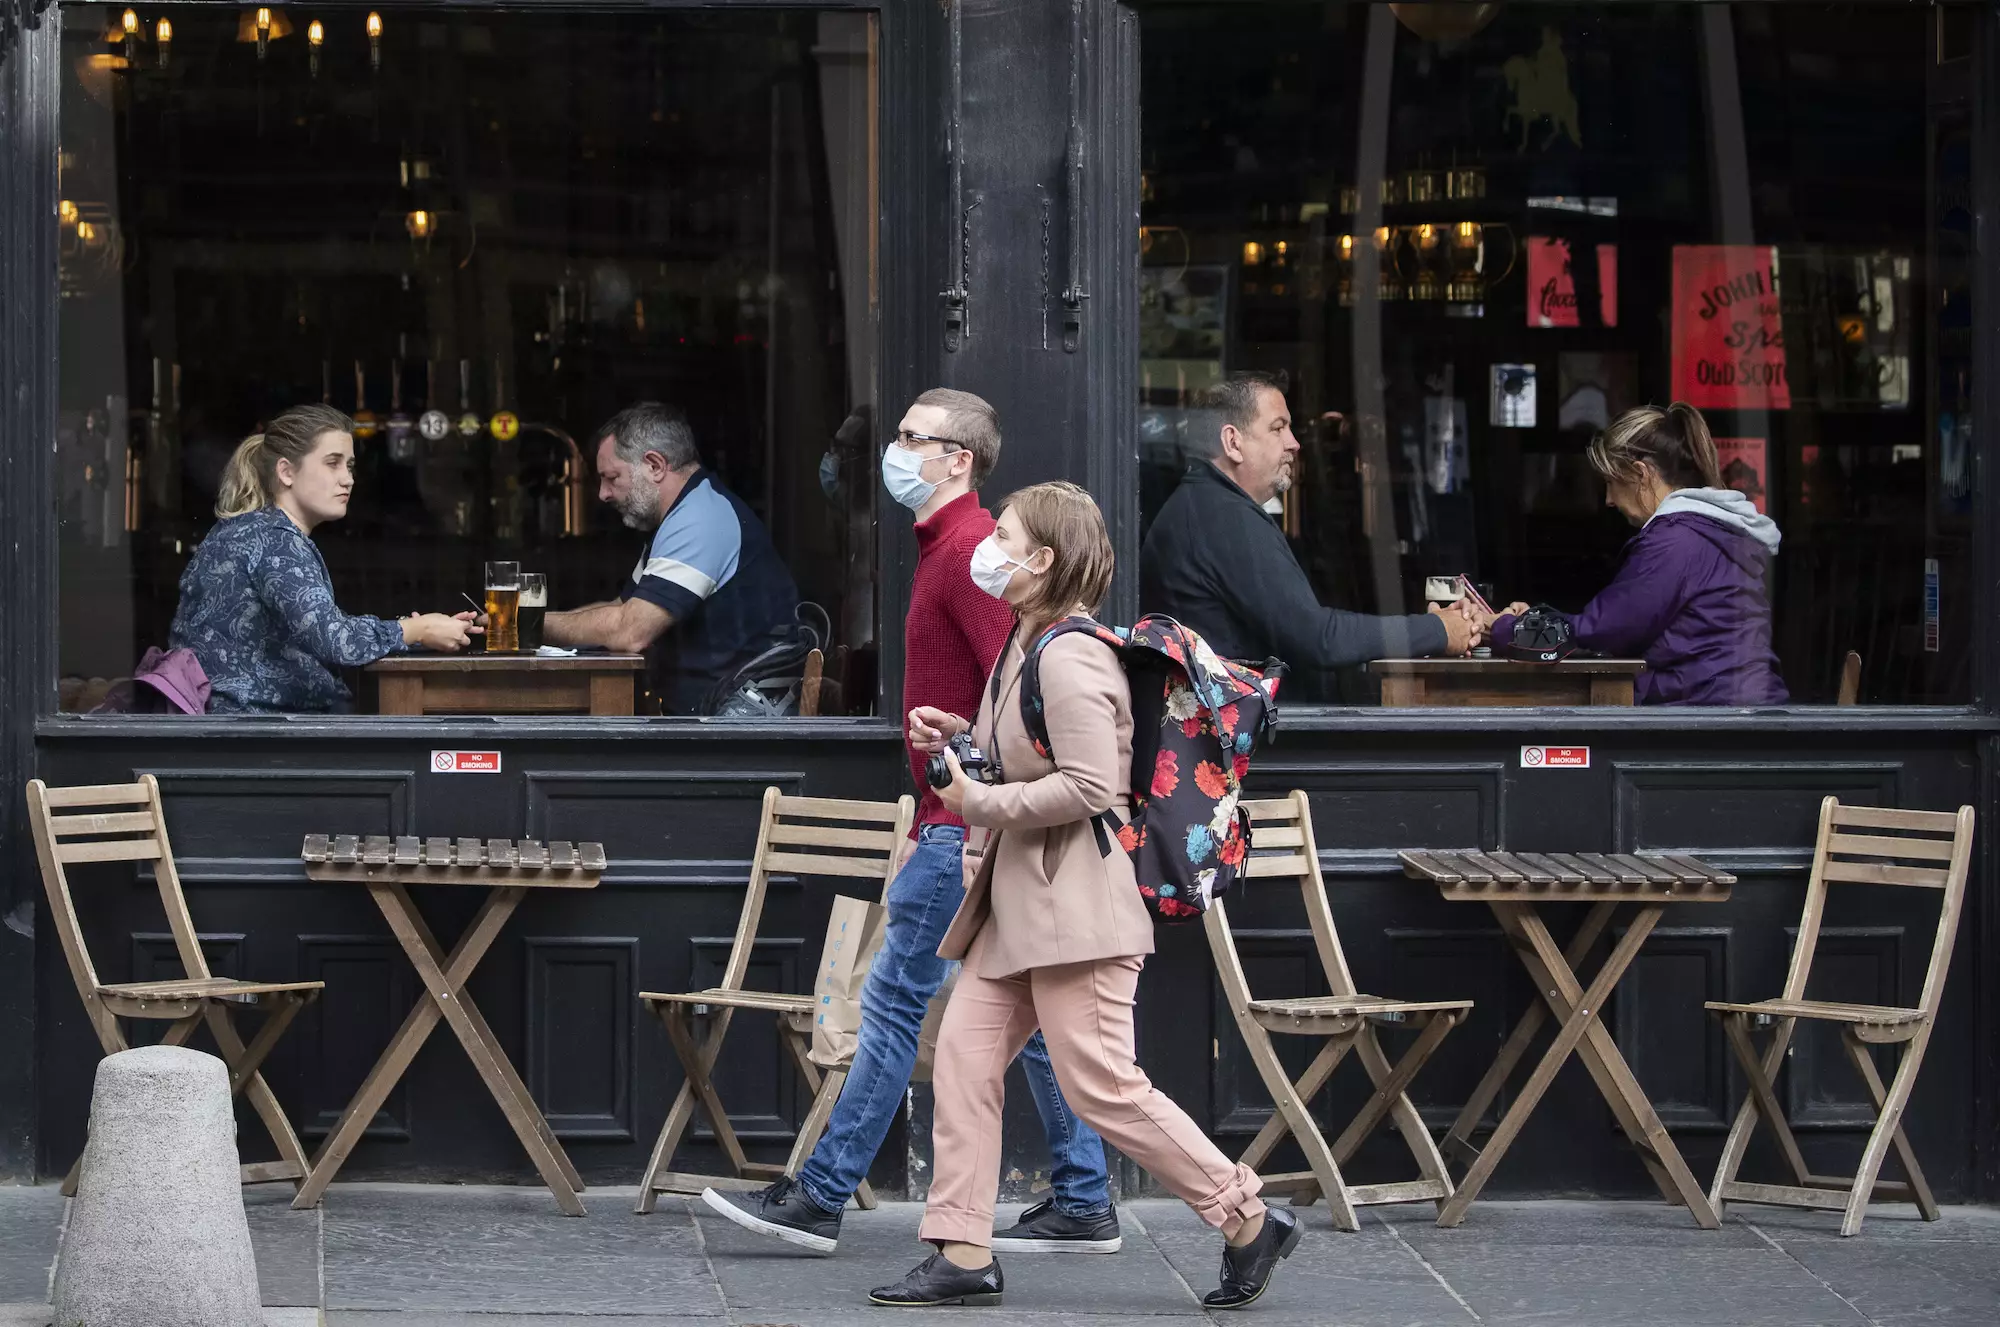 People wearing protective face masks walk past a bar in Edinburgh city centre (